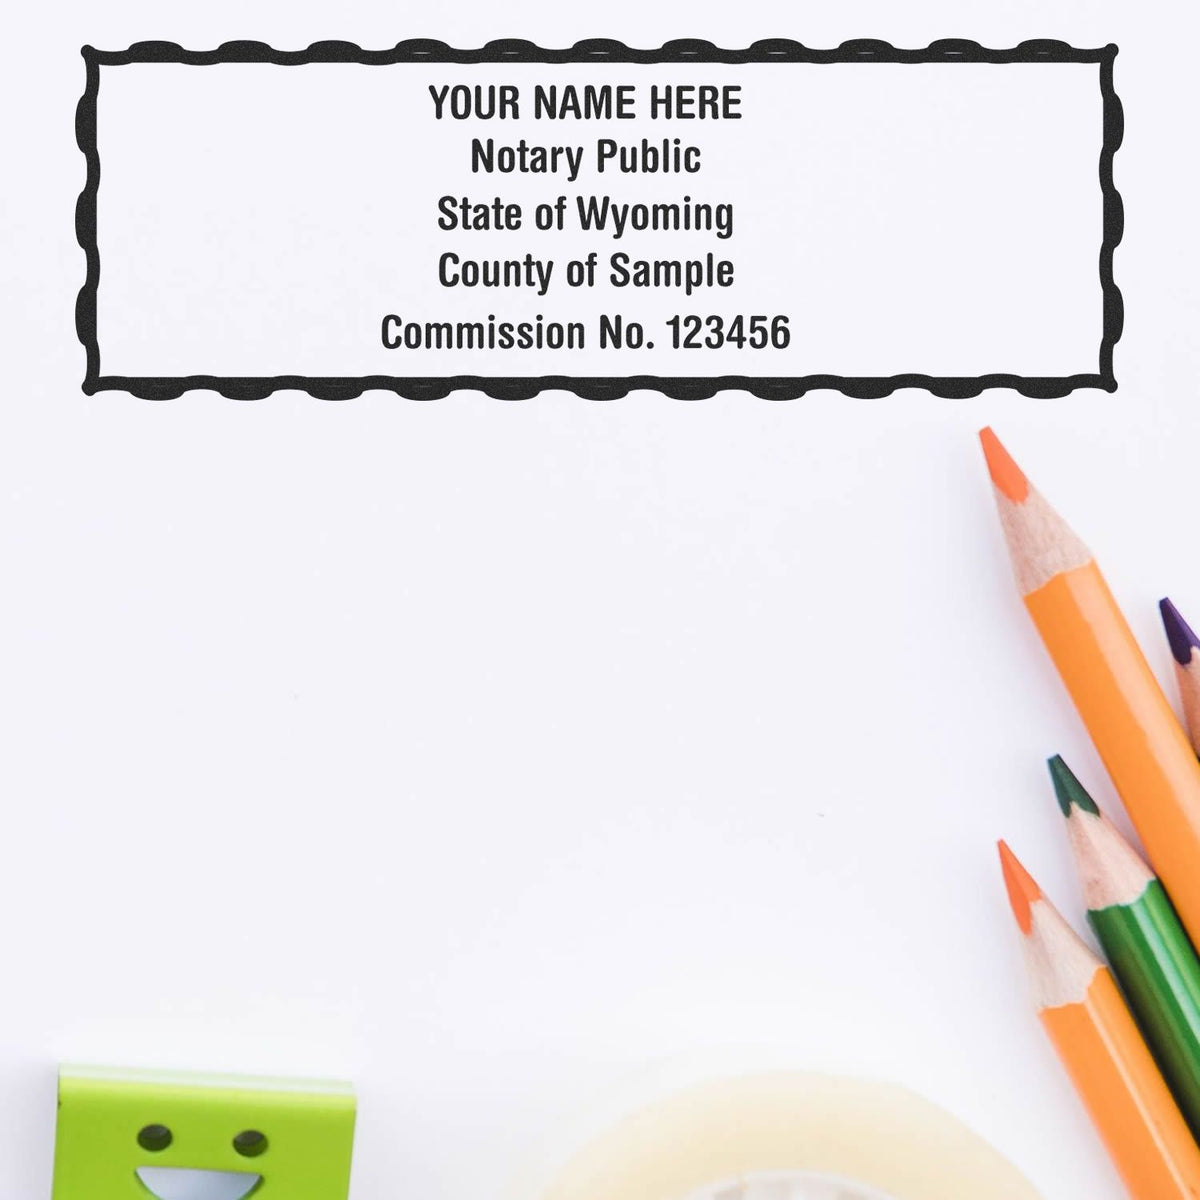 A lifestyle photo showing a stamped image of the Heavy-Duty Wyoming Rectangular Notary Stamp on a piece of paper